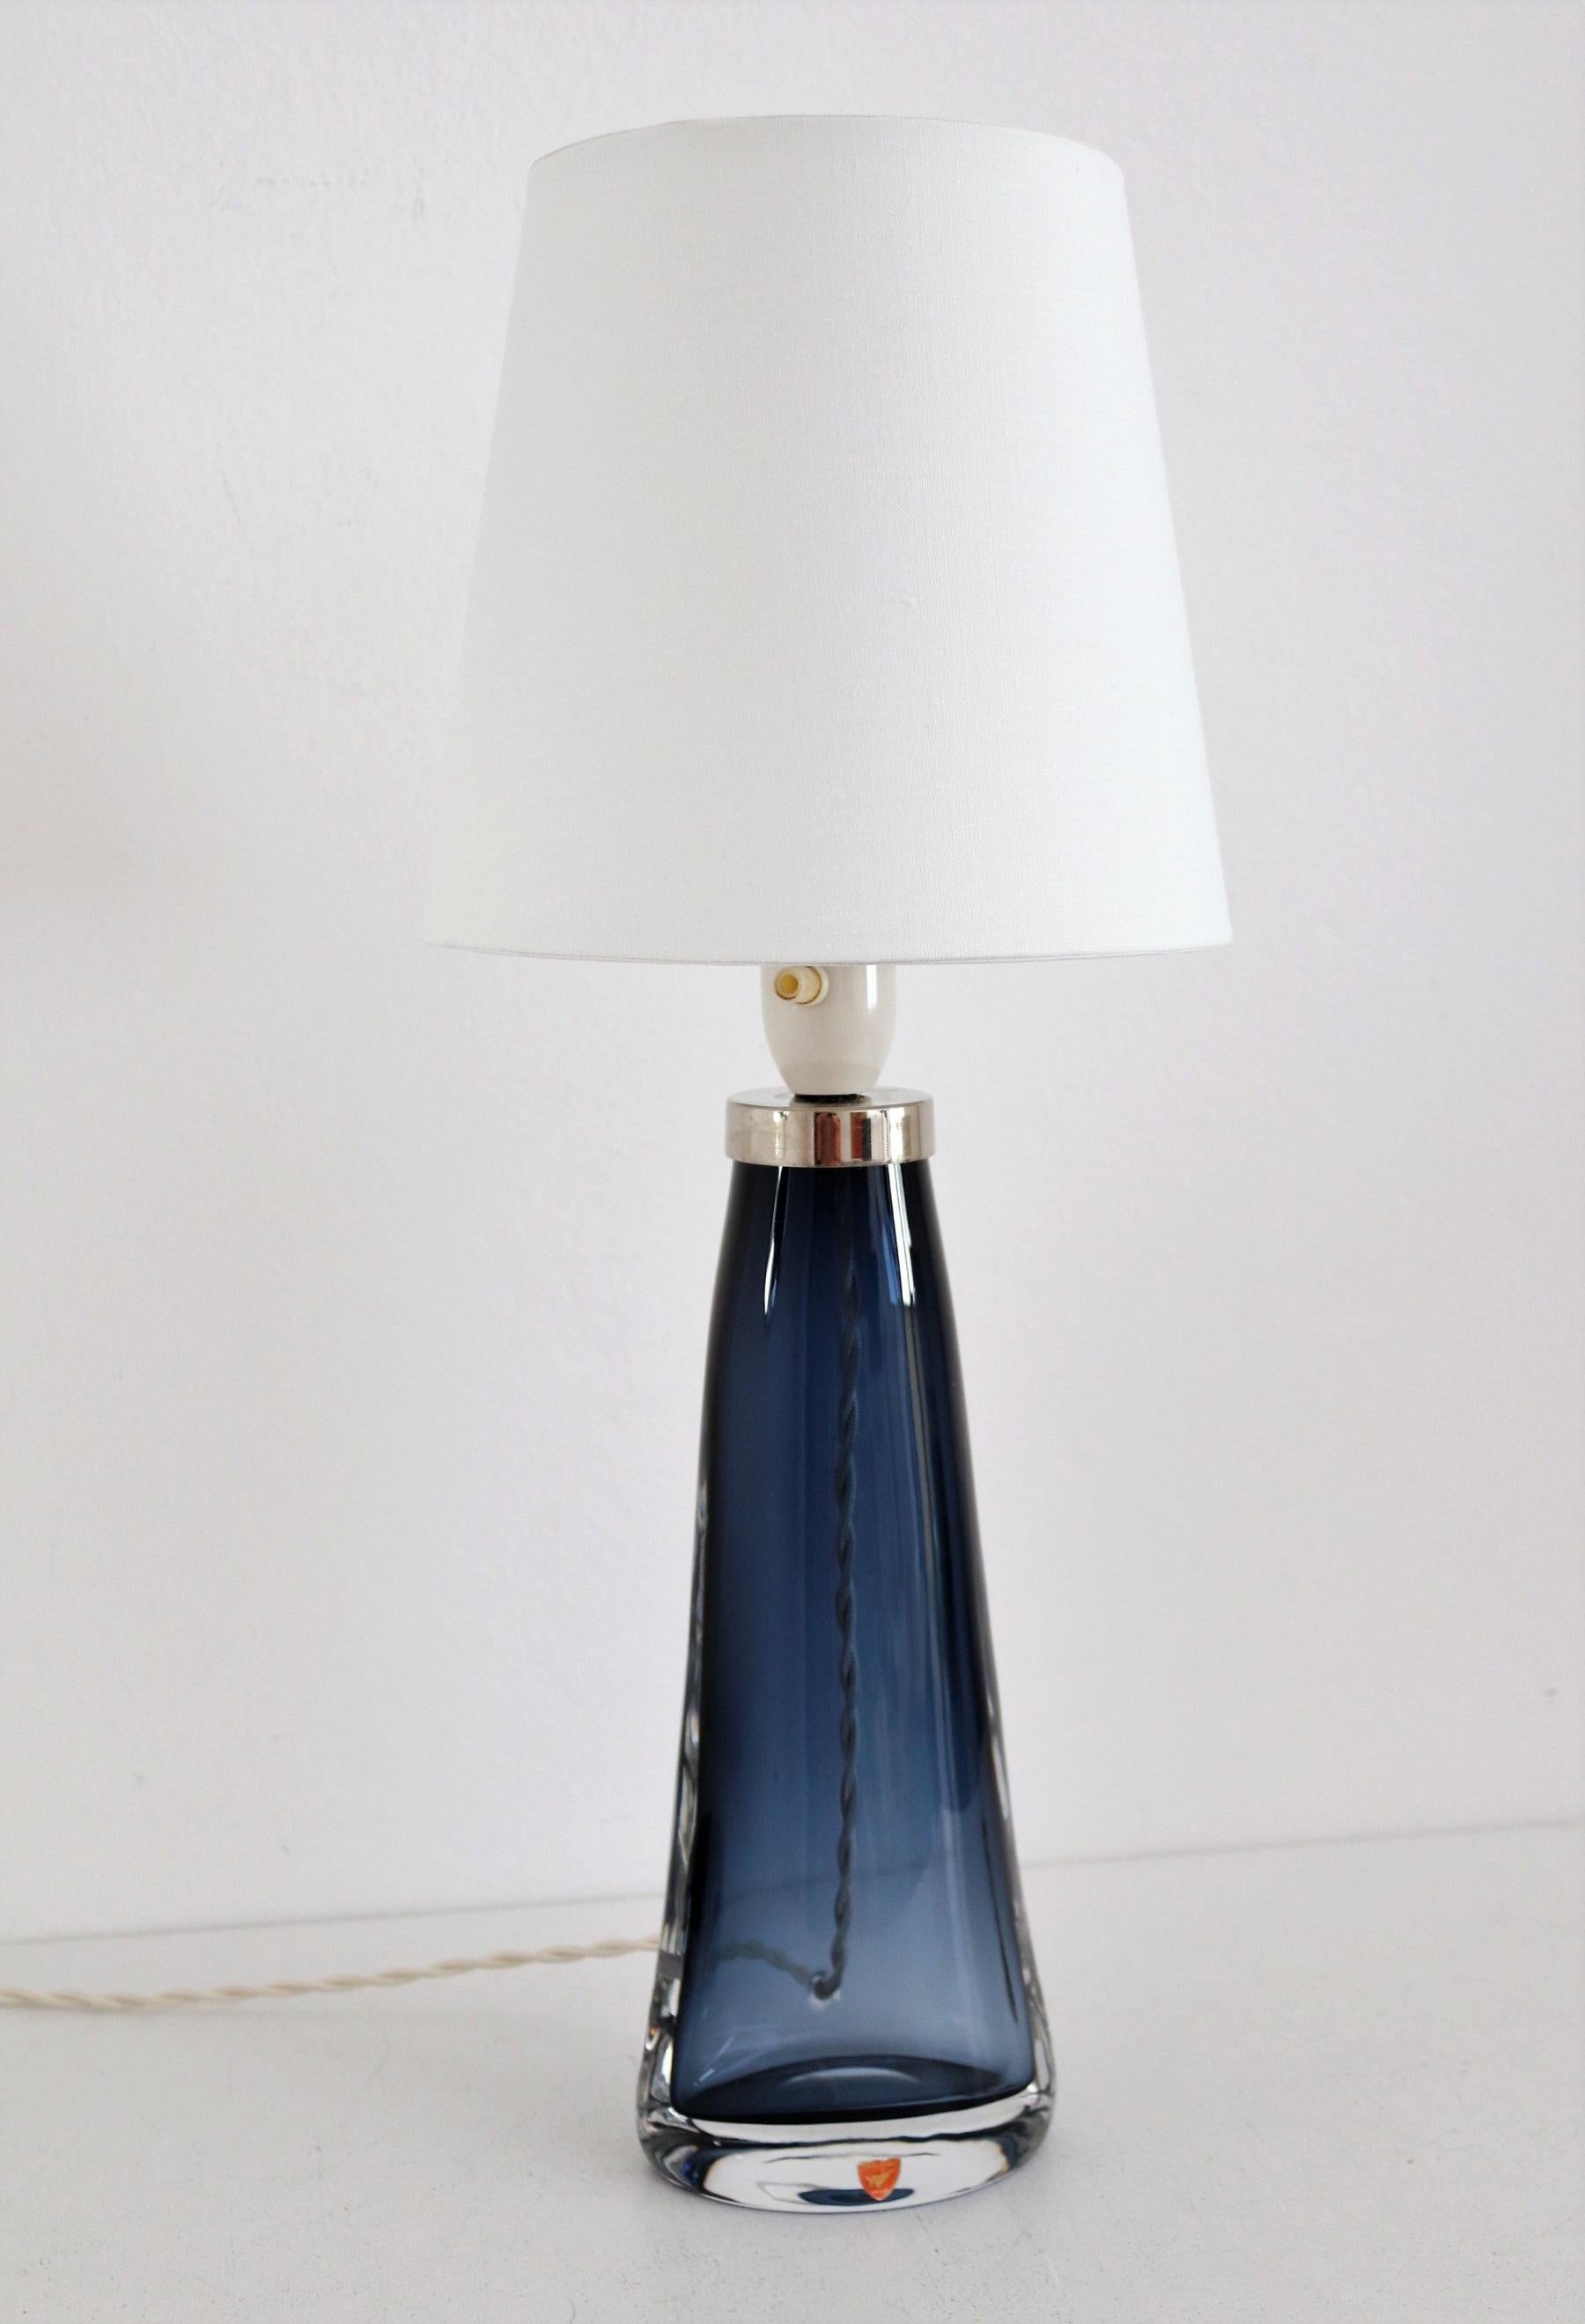 Swedish Midcentury Crystal Table Lamp by Carl Fagerlund for Orrefors, 1960s For Sale 5